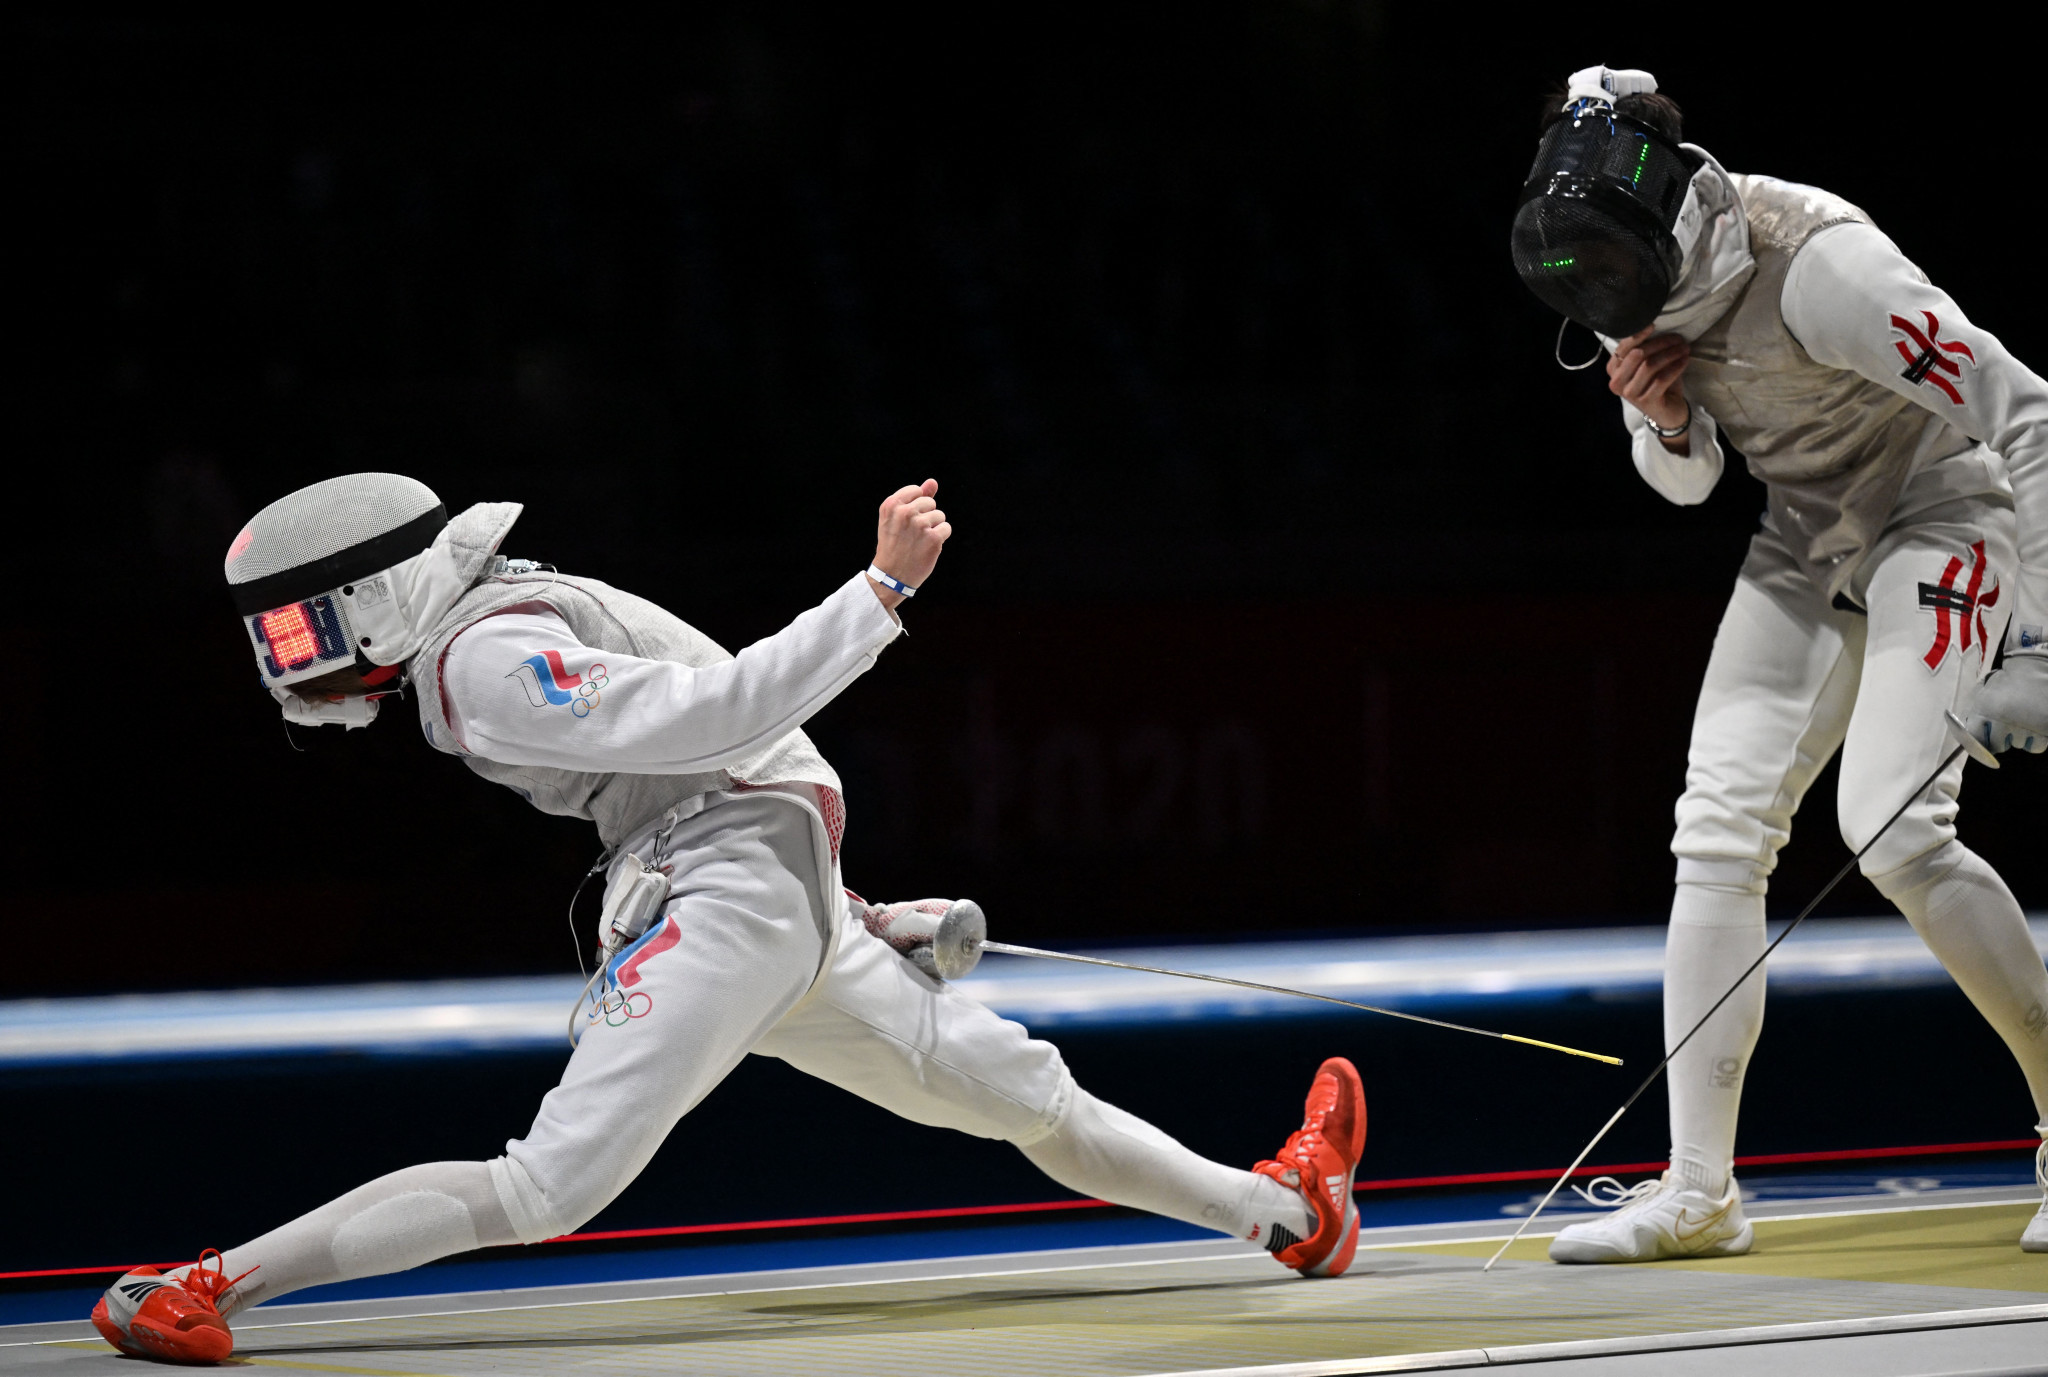 Russian fencers are hoping to return to international competition to enable them to vie for Paris 2024 qualification spots ©Getty Images